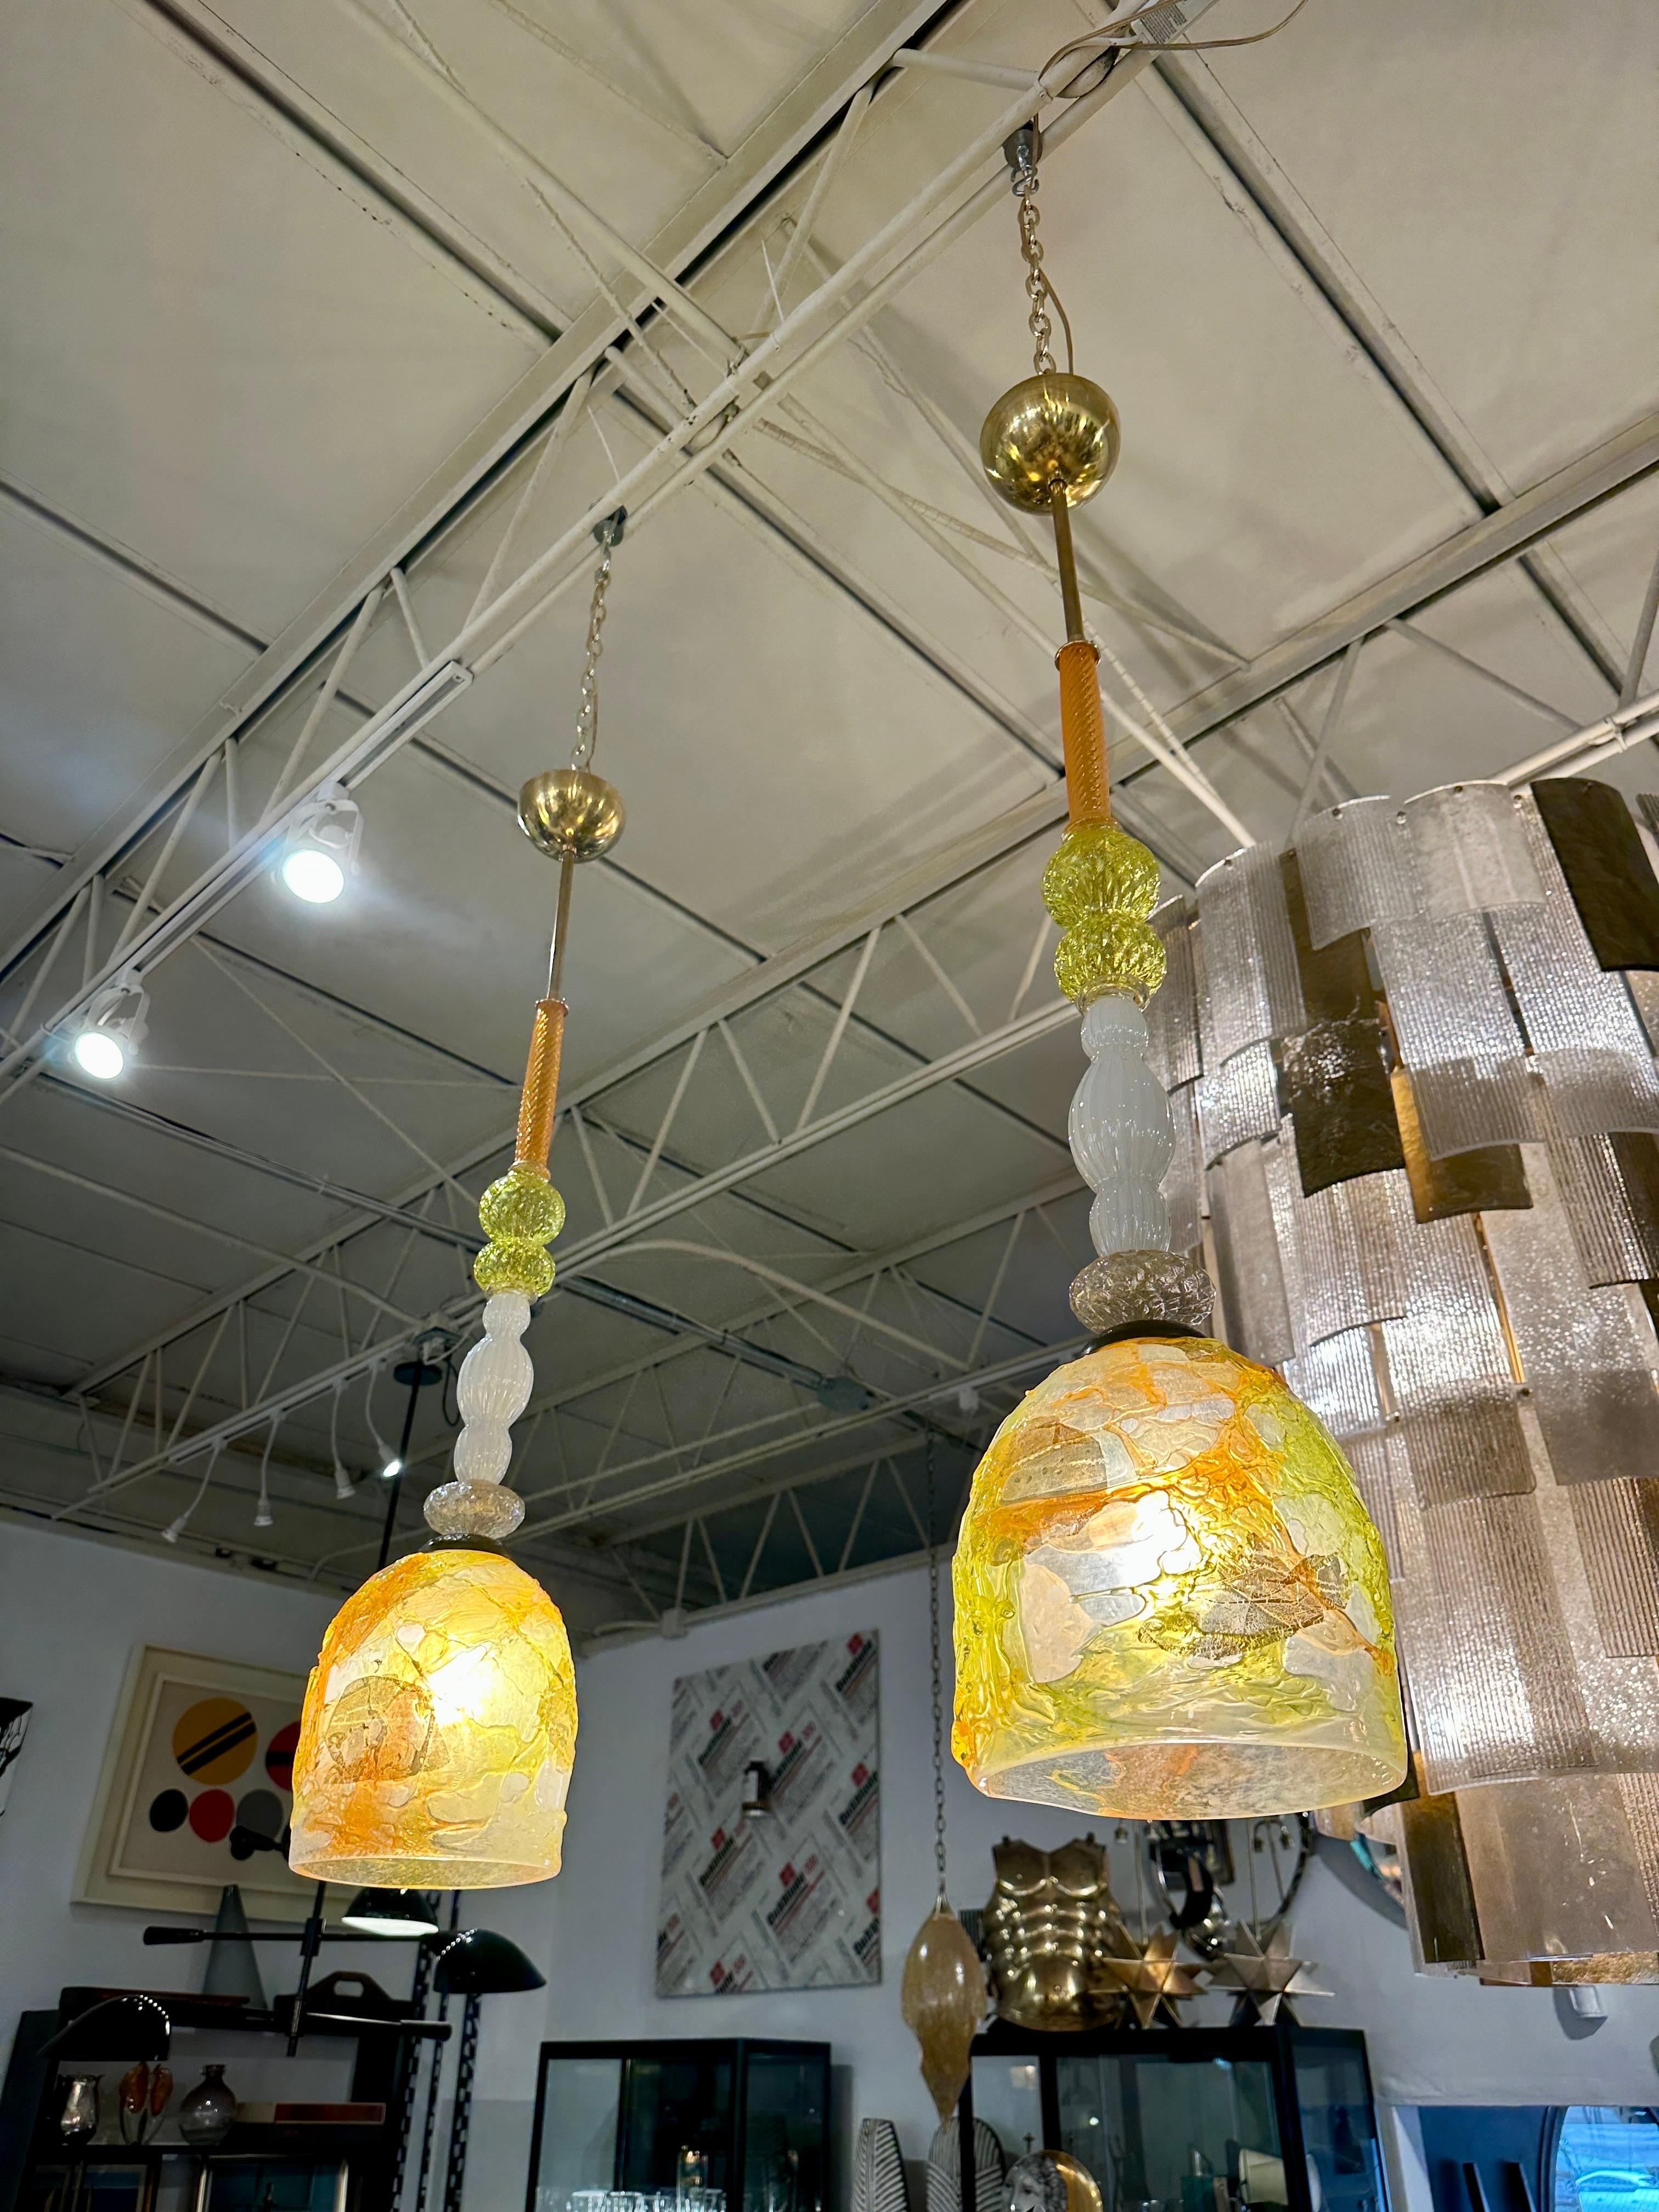 These amazingly original Murano glass pendants are EXTRA special due to their components.  Two were made and there are NONE like these since the glass parts used are vintage and remnants of the glass blowing factory.  Each was designed uniquely.  A